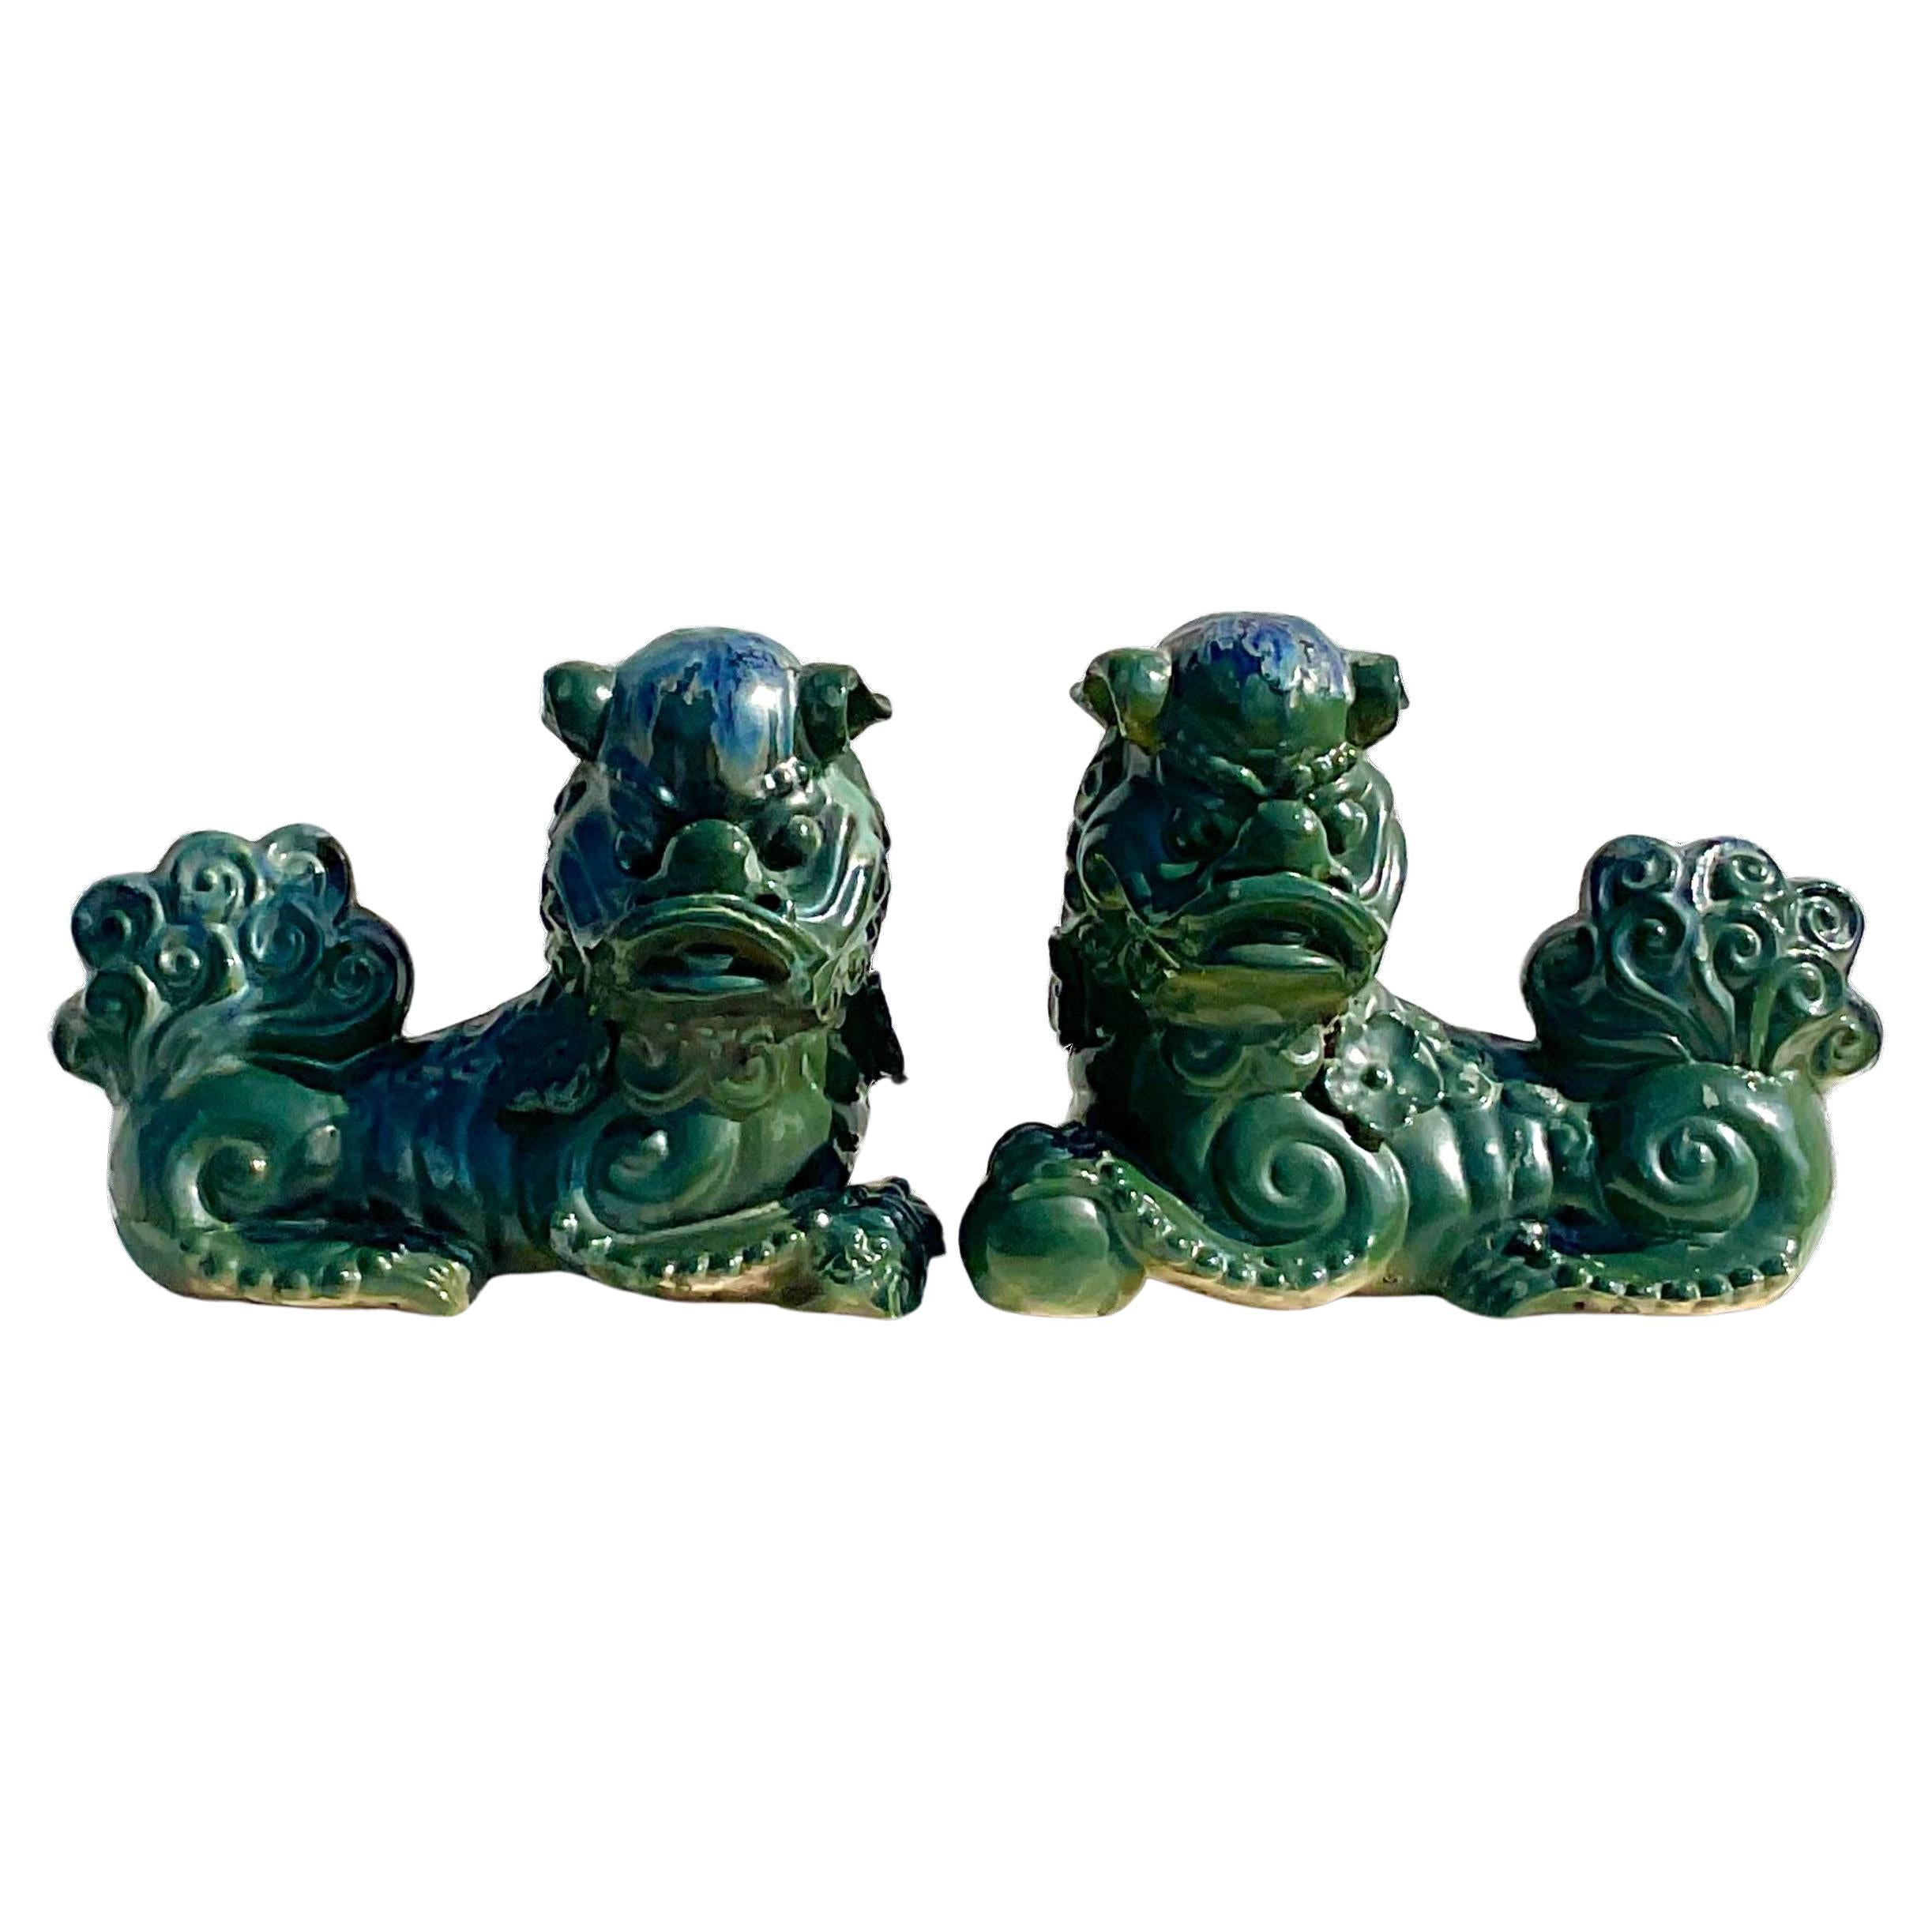 Vintage Asian Glazed Ceramic Foo Dogs - a Pair For Sale